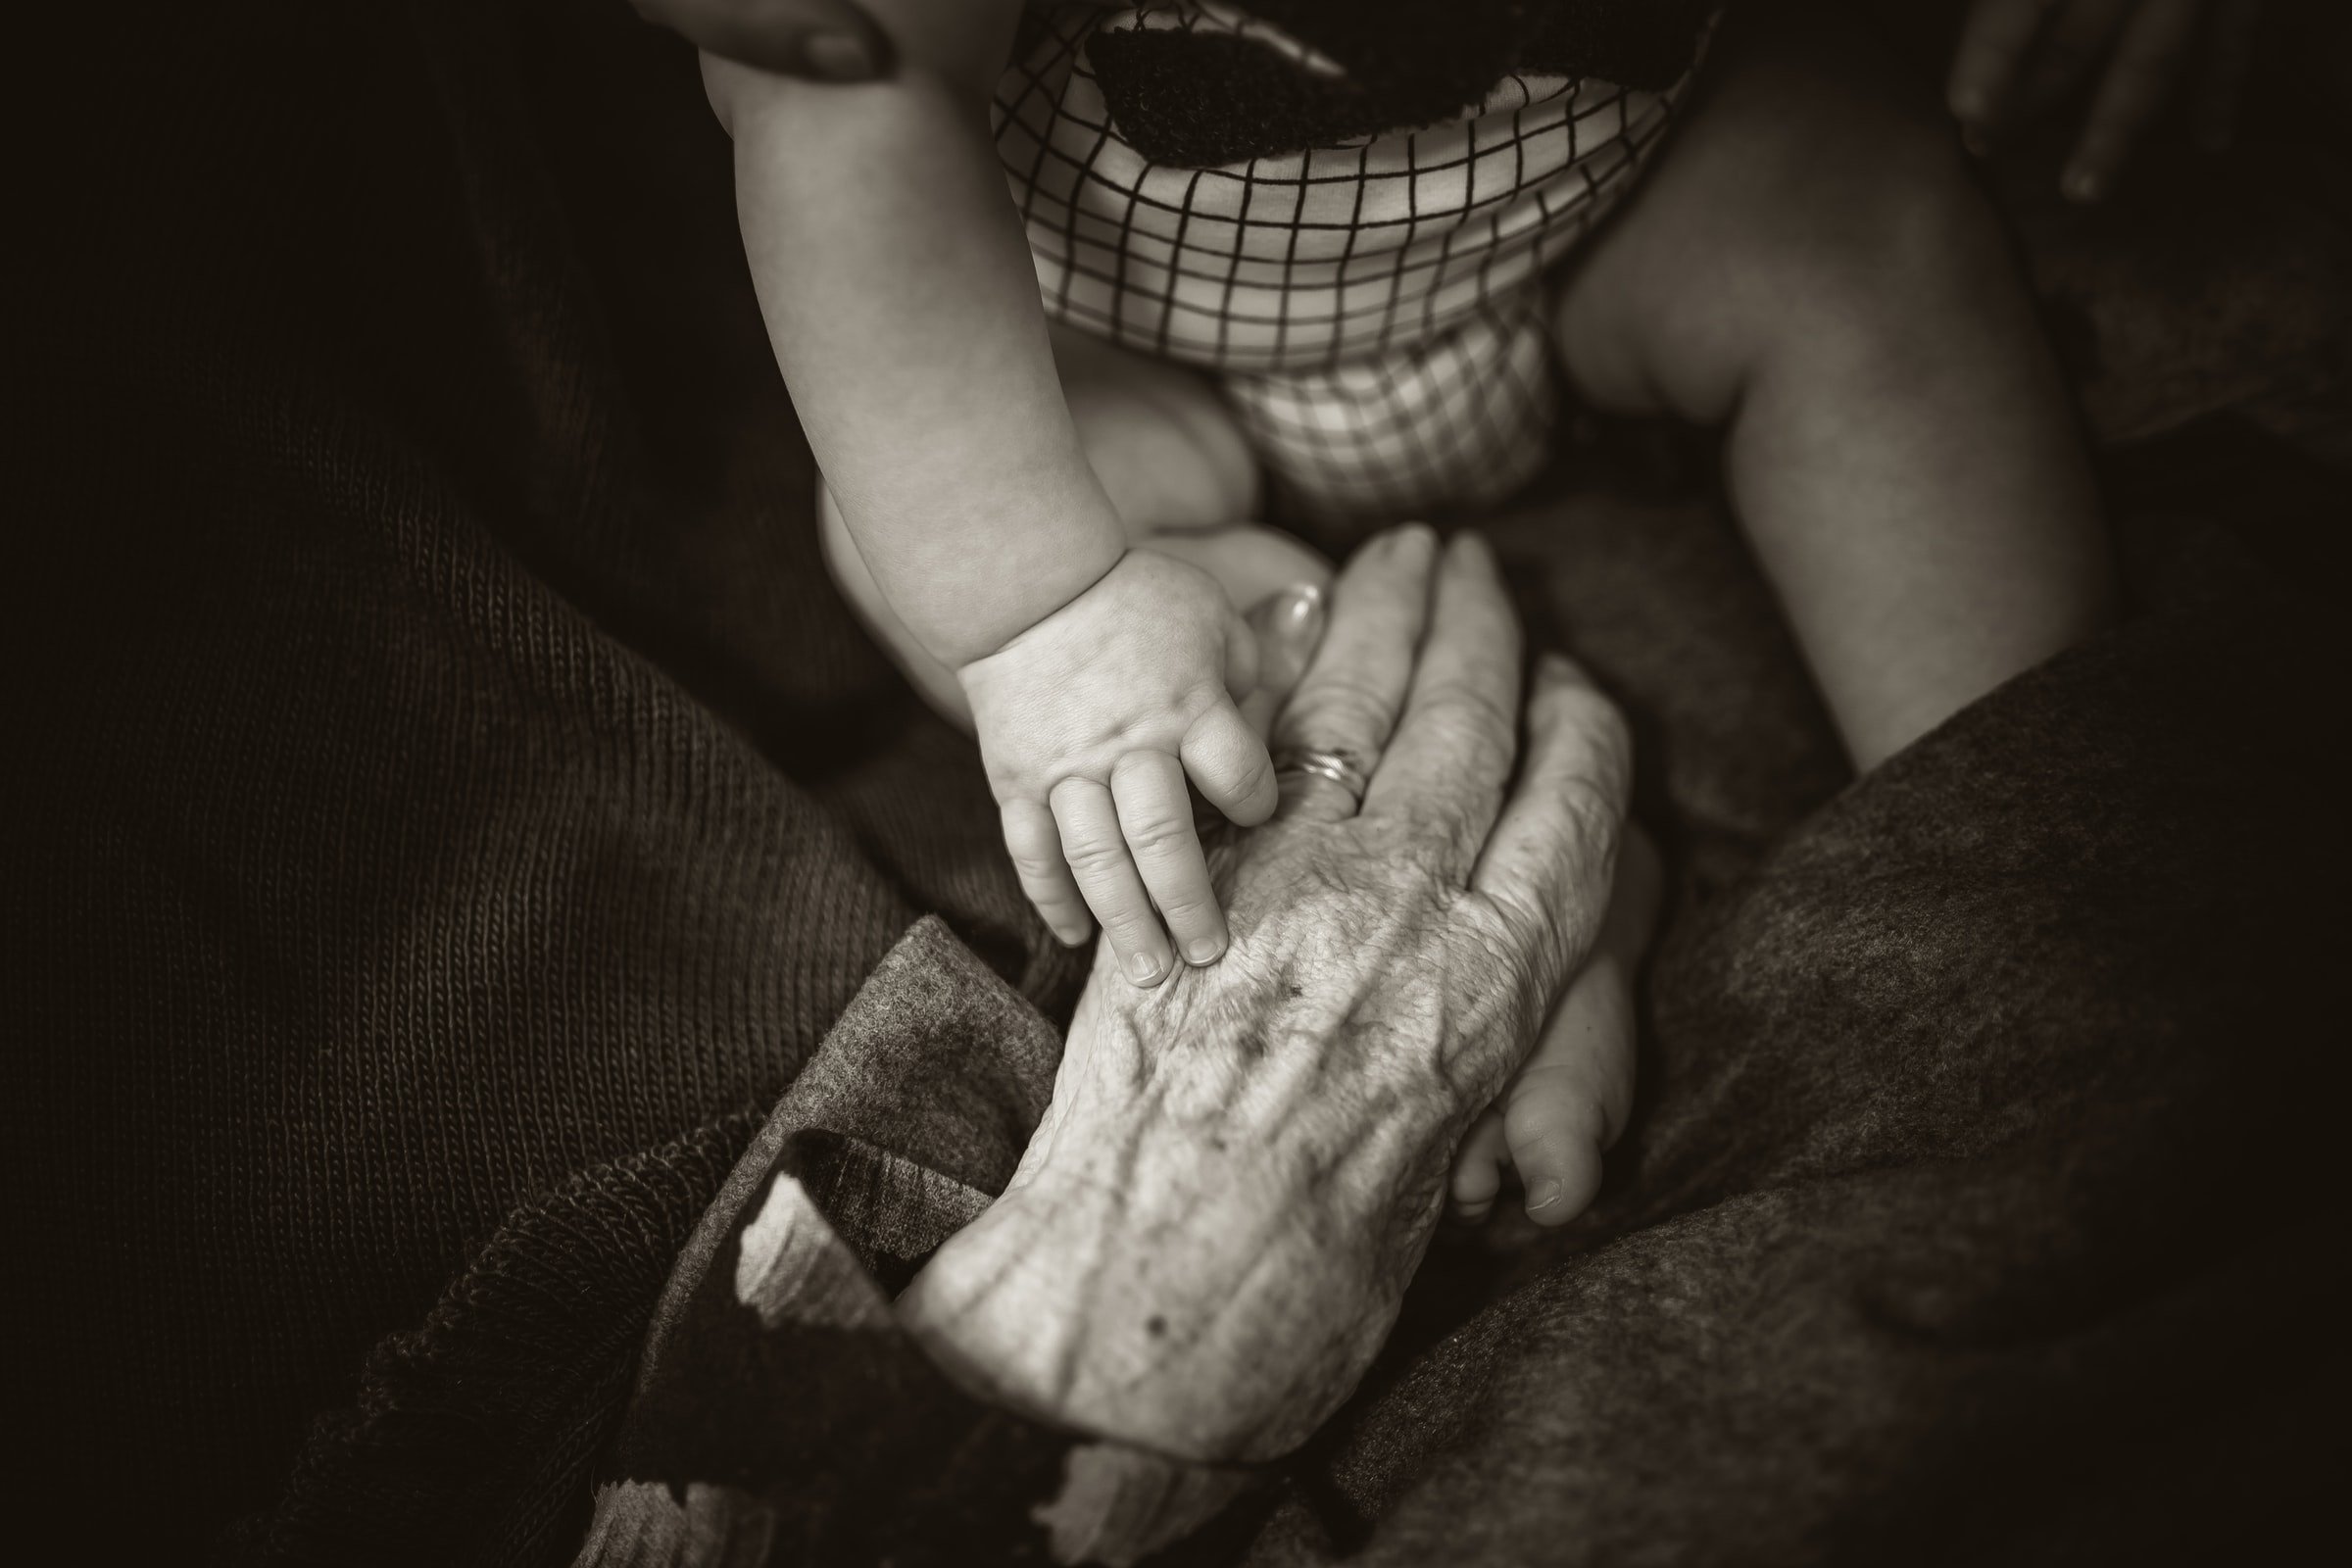 Old woman's hand with a baby's hand. | Source: Unsplash